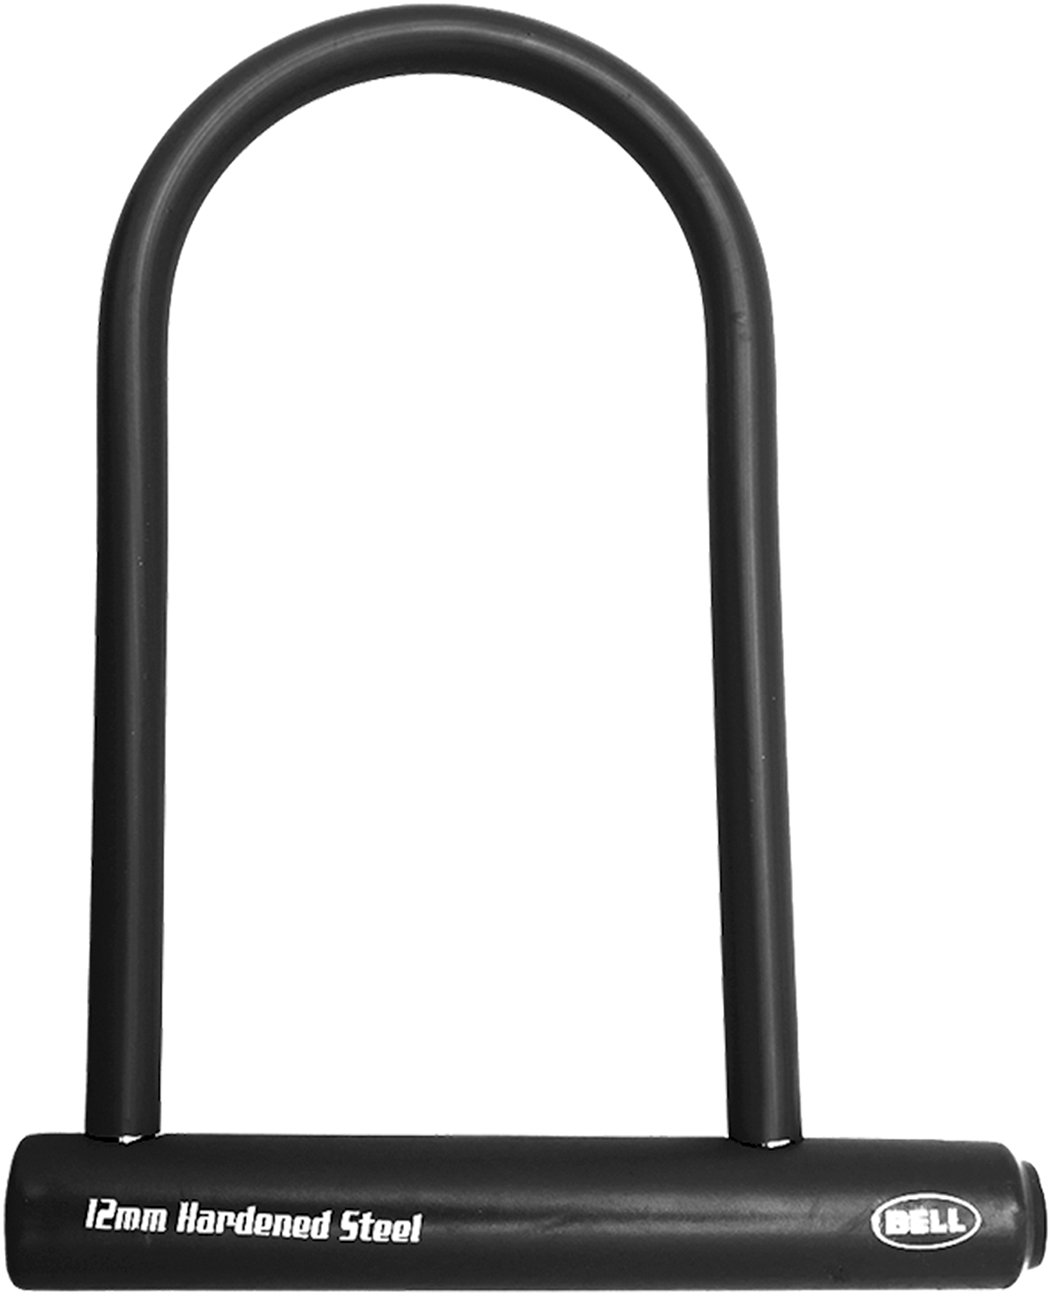 Bell Ballistic 610 Cable Lock with Lighted Key